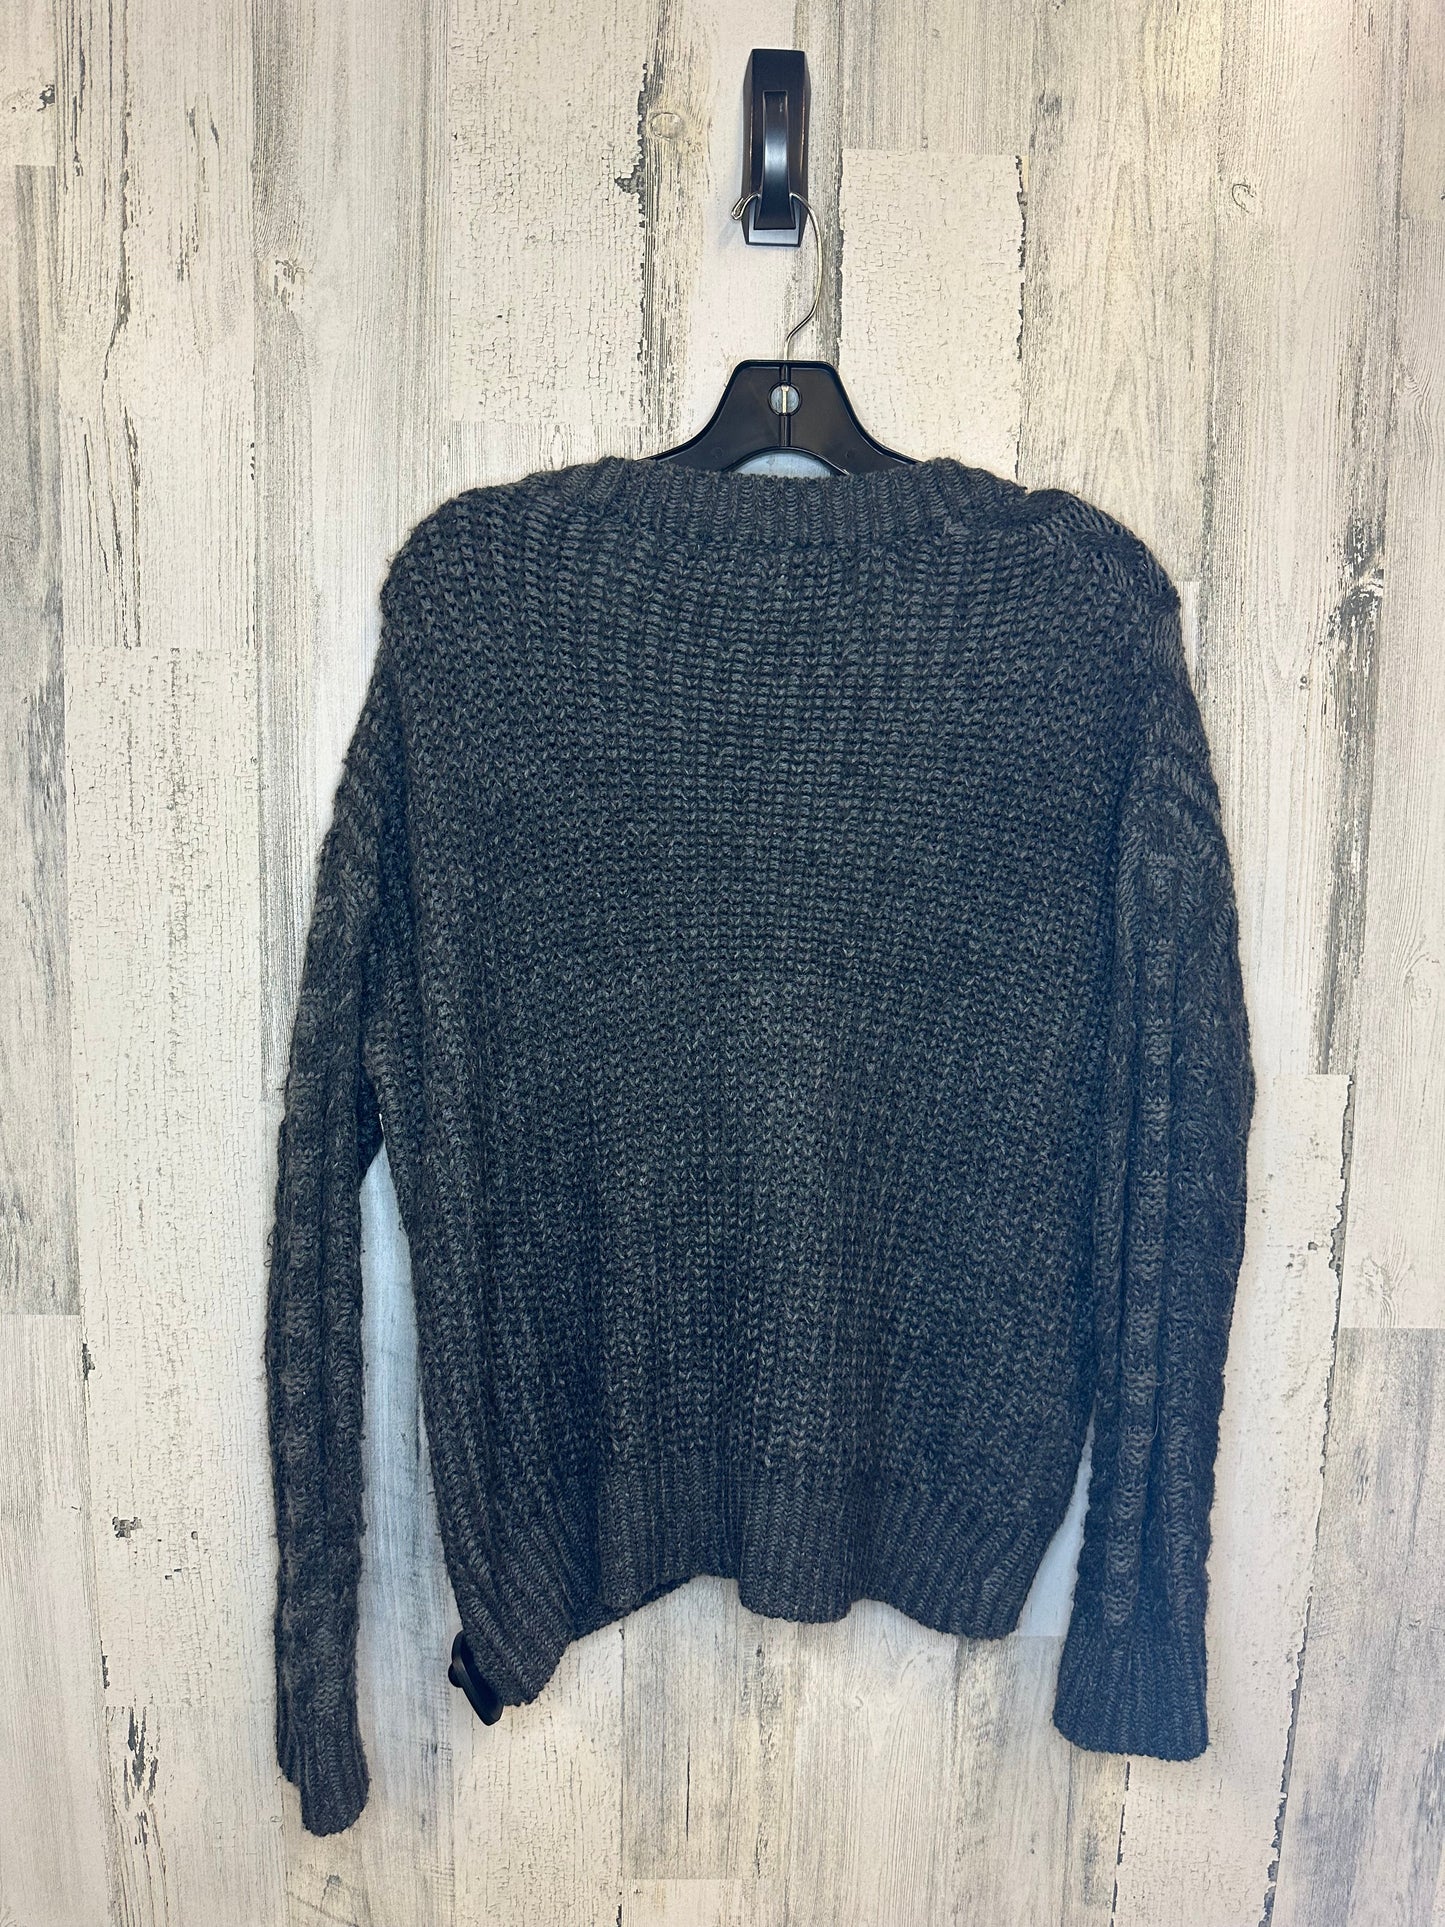 Sweater By Olive And Oak Size: Xs